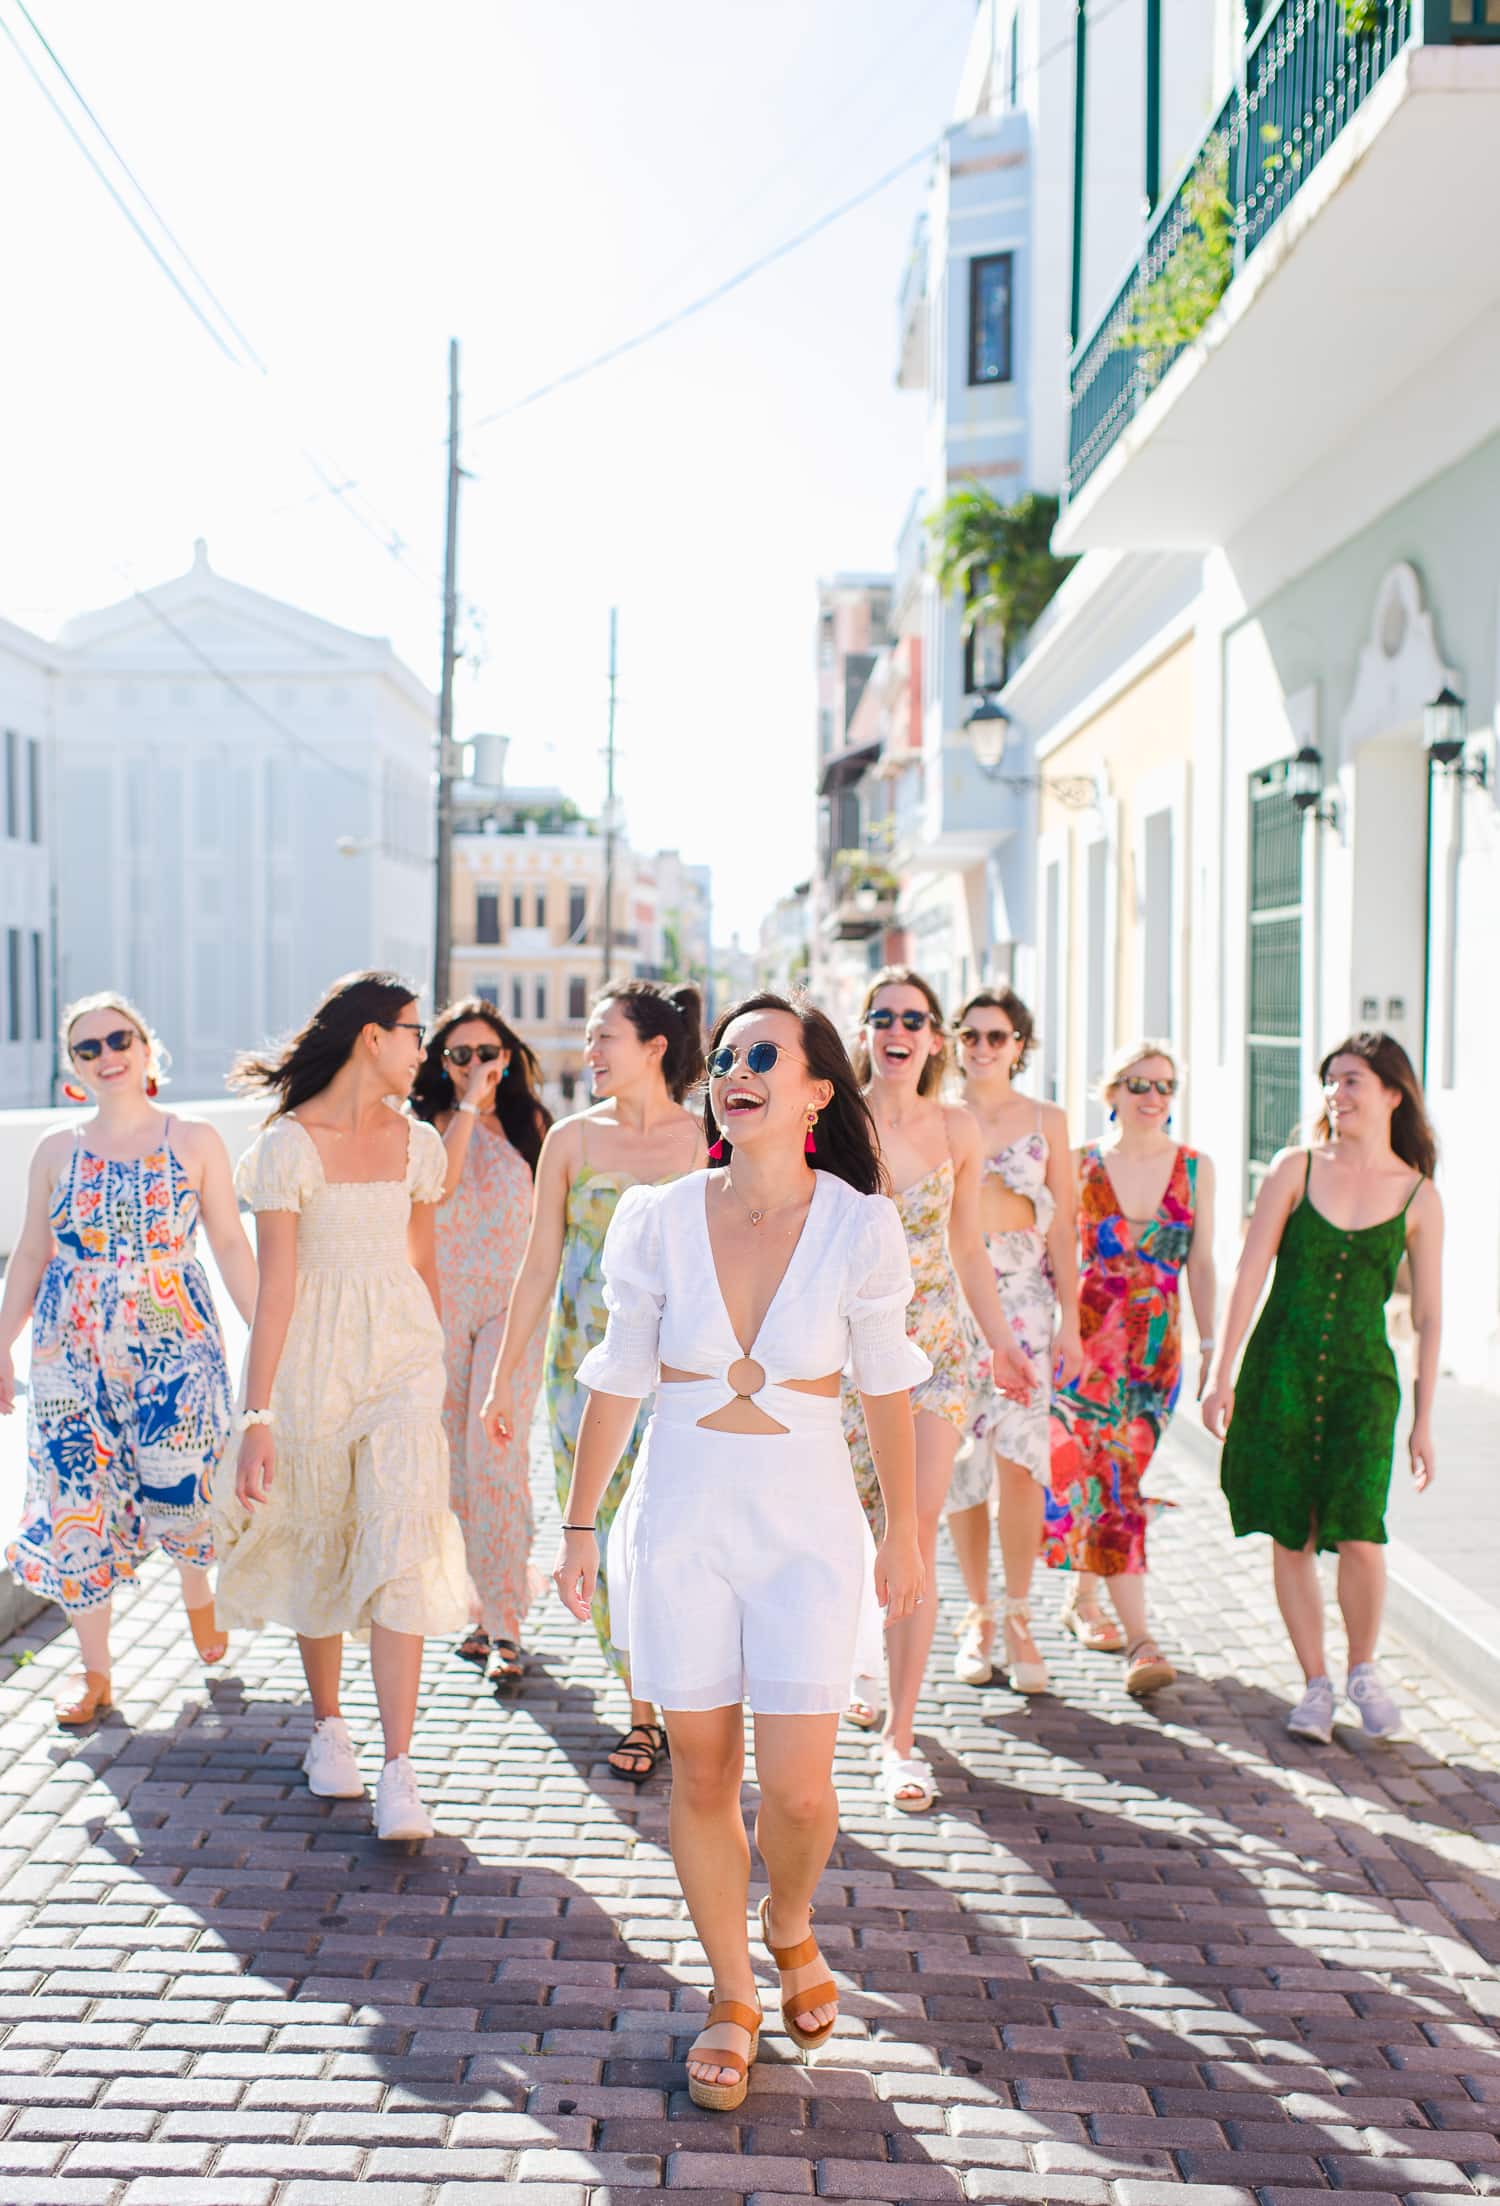 Starry & her friends had an unforgettable bachelorette trip to Puerto Rico, topped off with stunning bachelorette party photos in Old San Juan during SanSe!